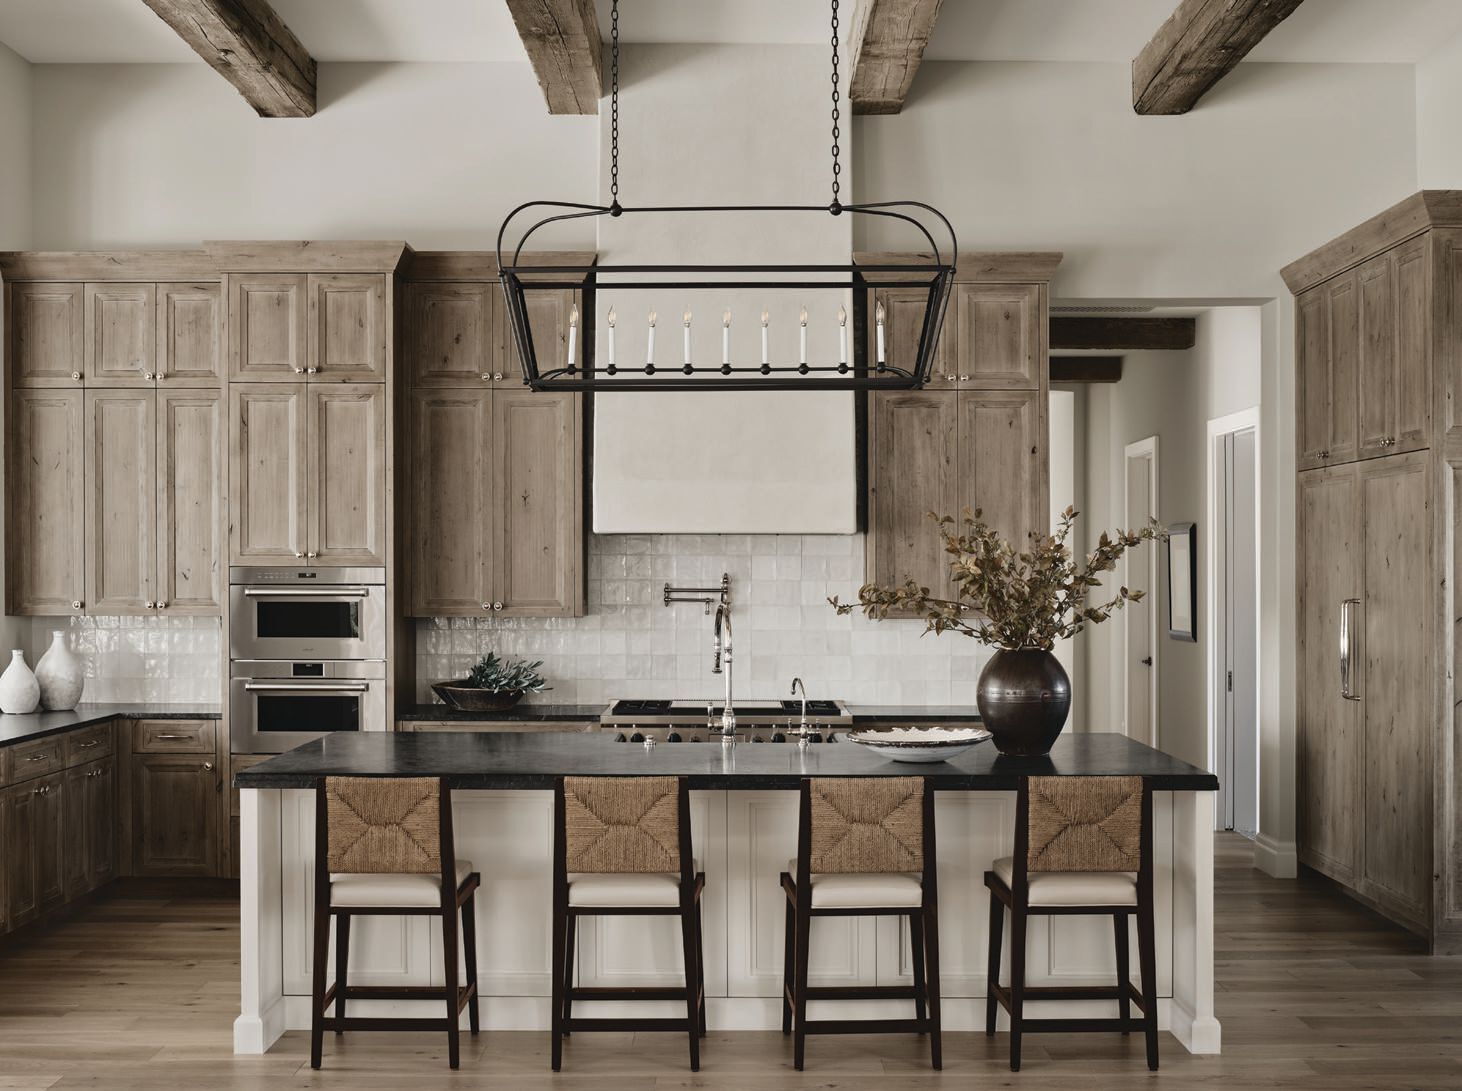 Wood beams and cabinetry in a stained finish—with brass hardware from Clyde Hardware— add warmth to the kitchen. PHOTOGRAPHED BY DAN RYAN STUDIO